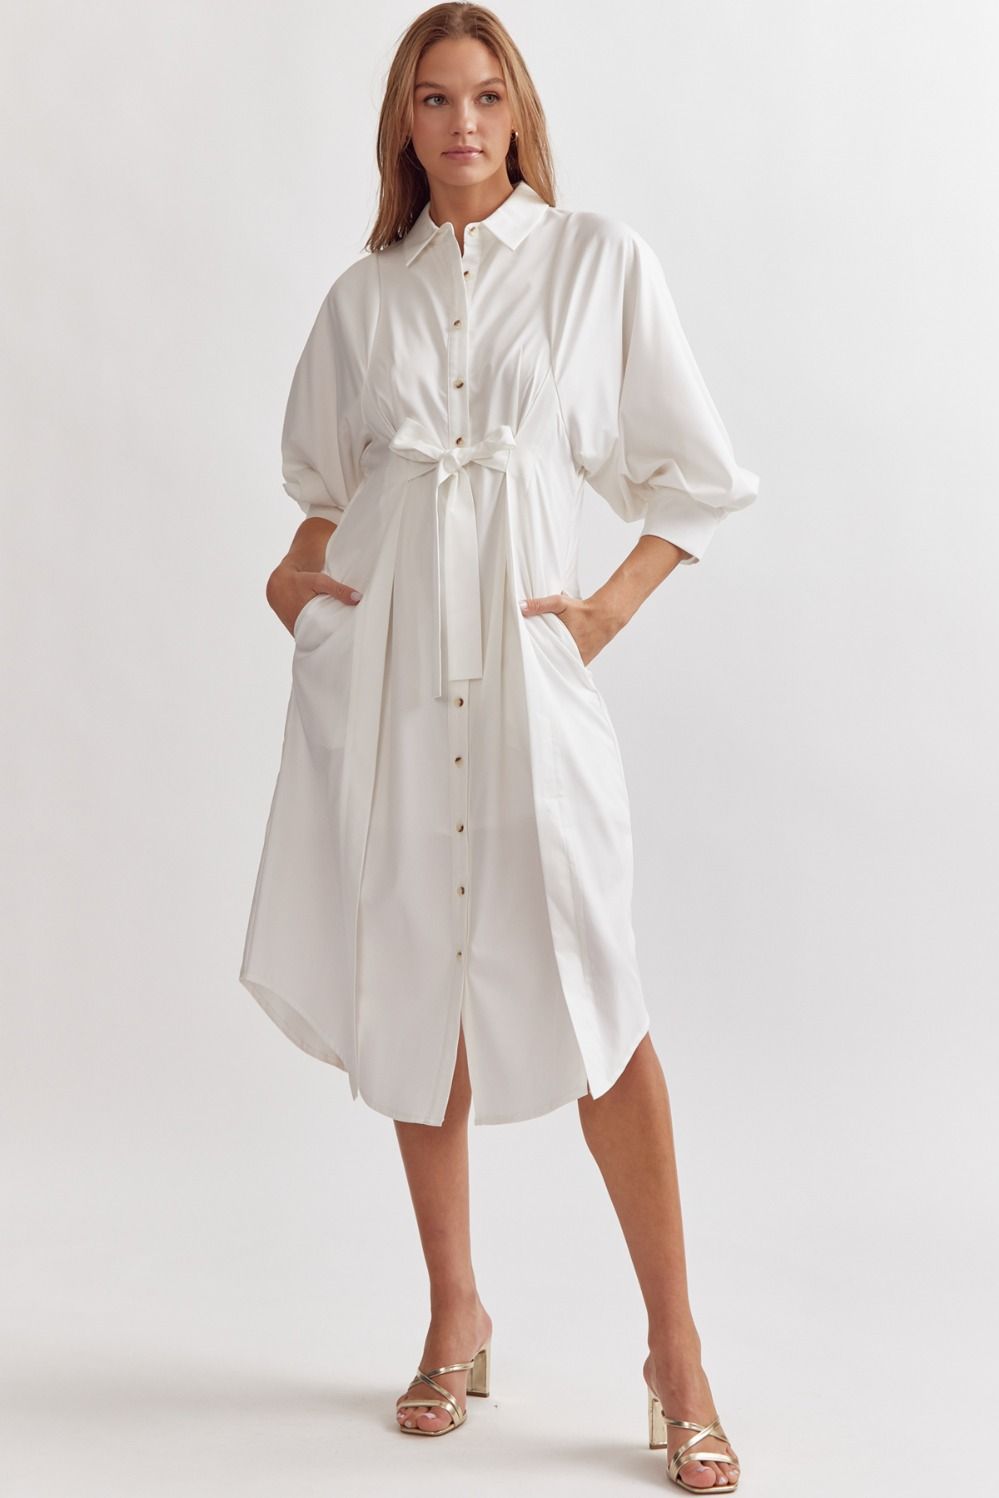 Hillary 3/4 Sleeve Bow Tie Front Woven Shirt Dress - White